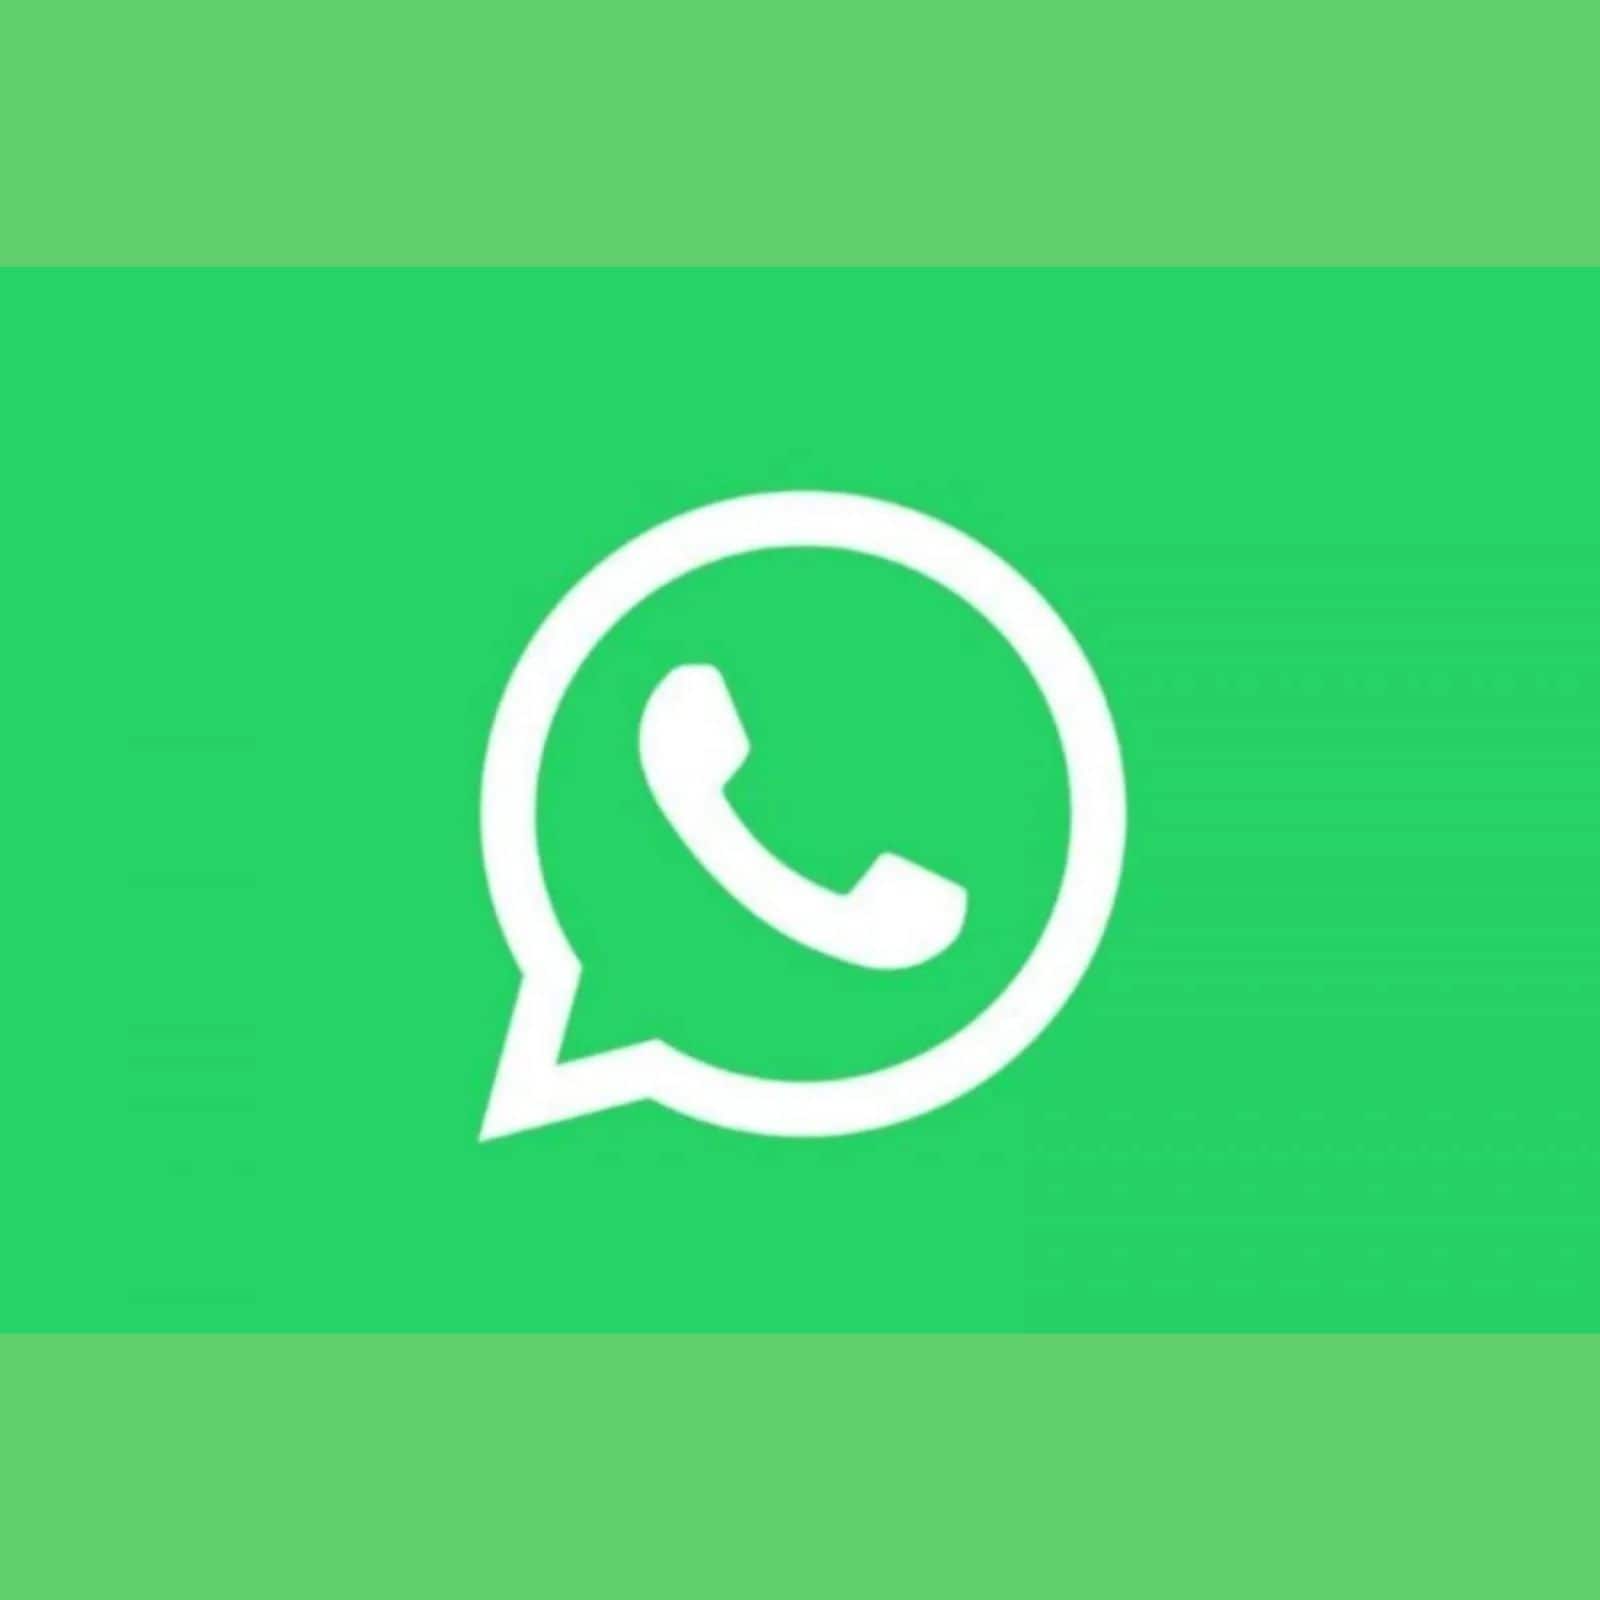 WhatsApp Tips And Tricks: How To Change Chat Background Wallpaper On WhatsApp